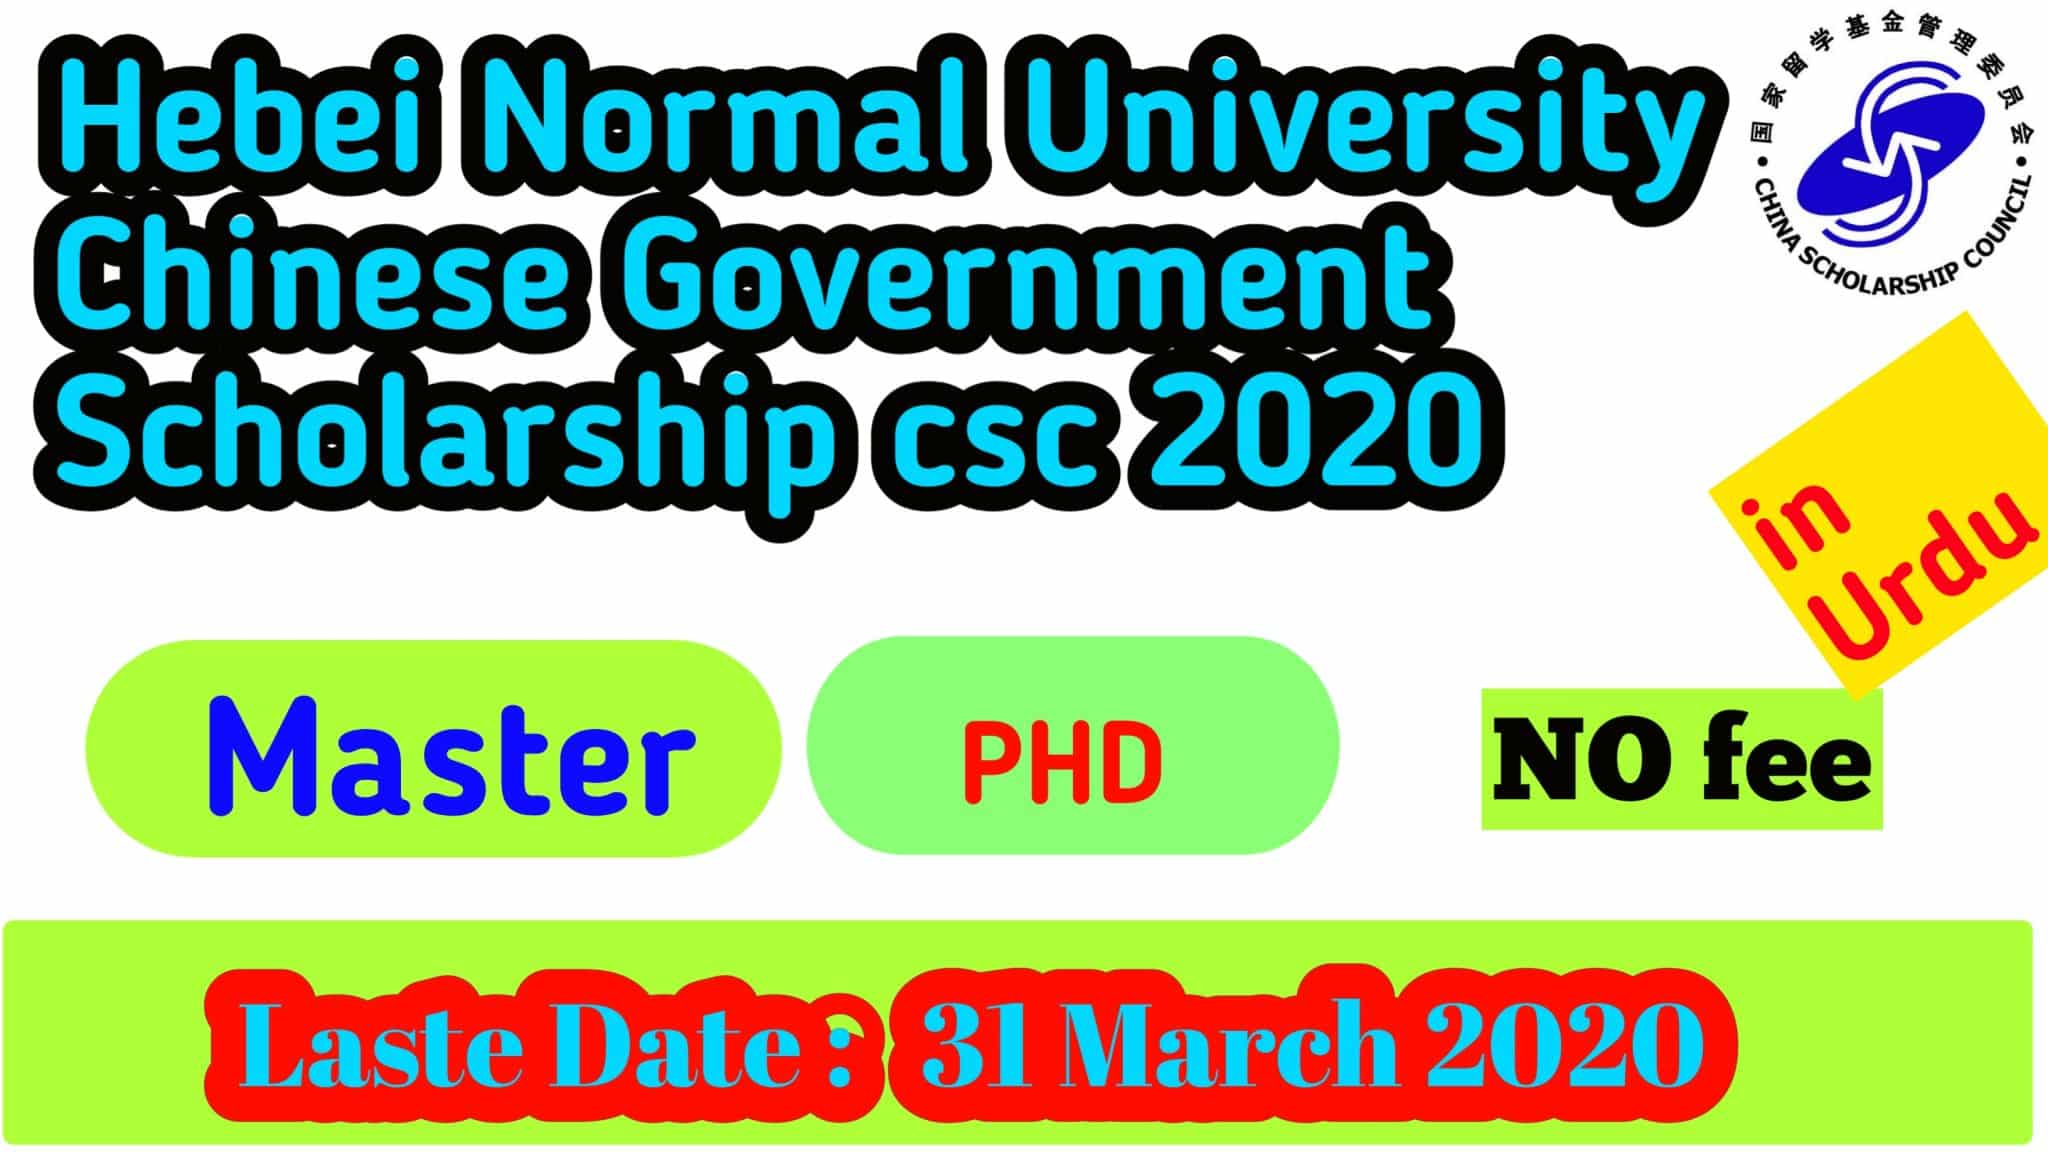 hebei normal university csc guide official